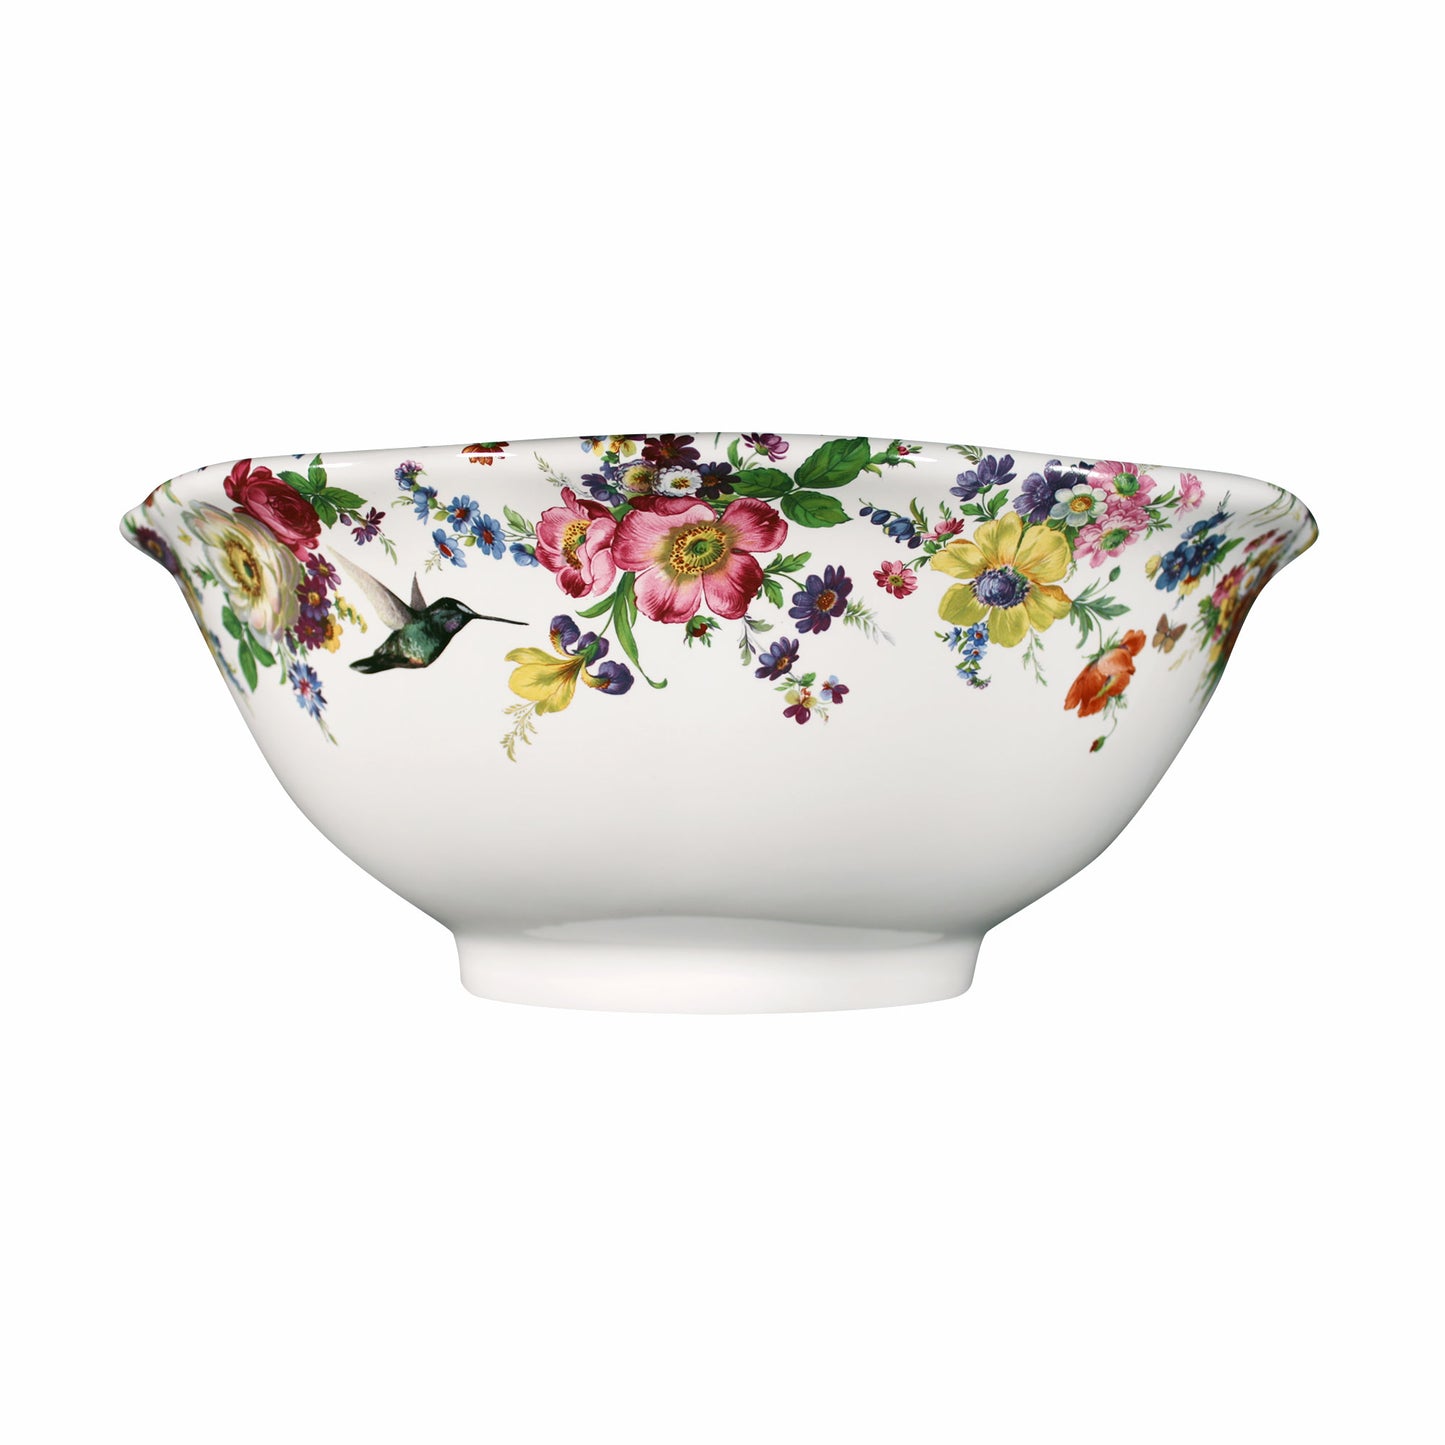 front view of painted flower vessel sink